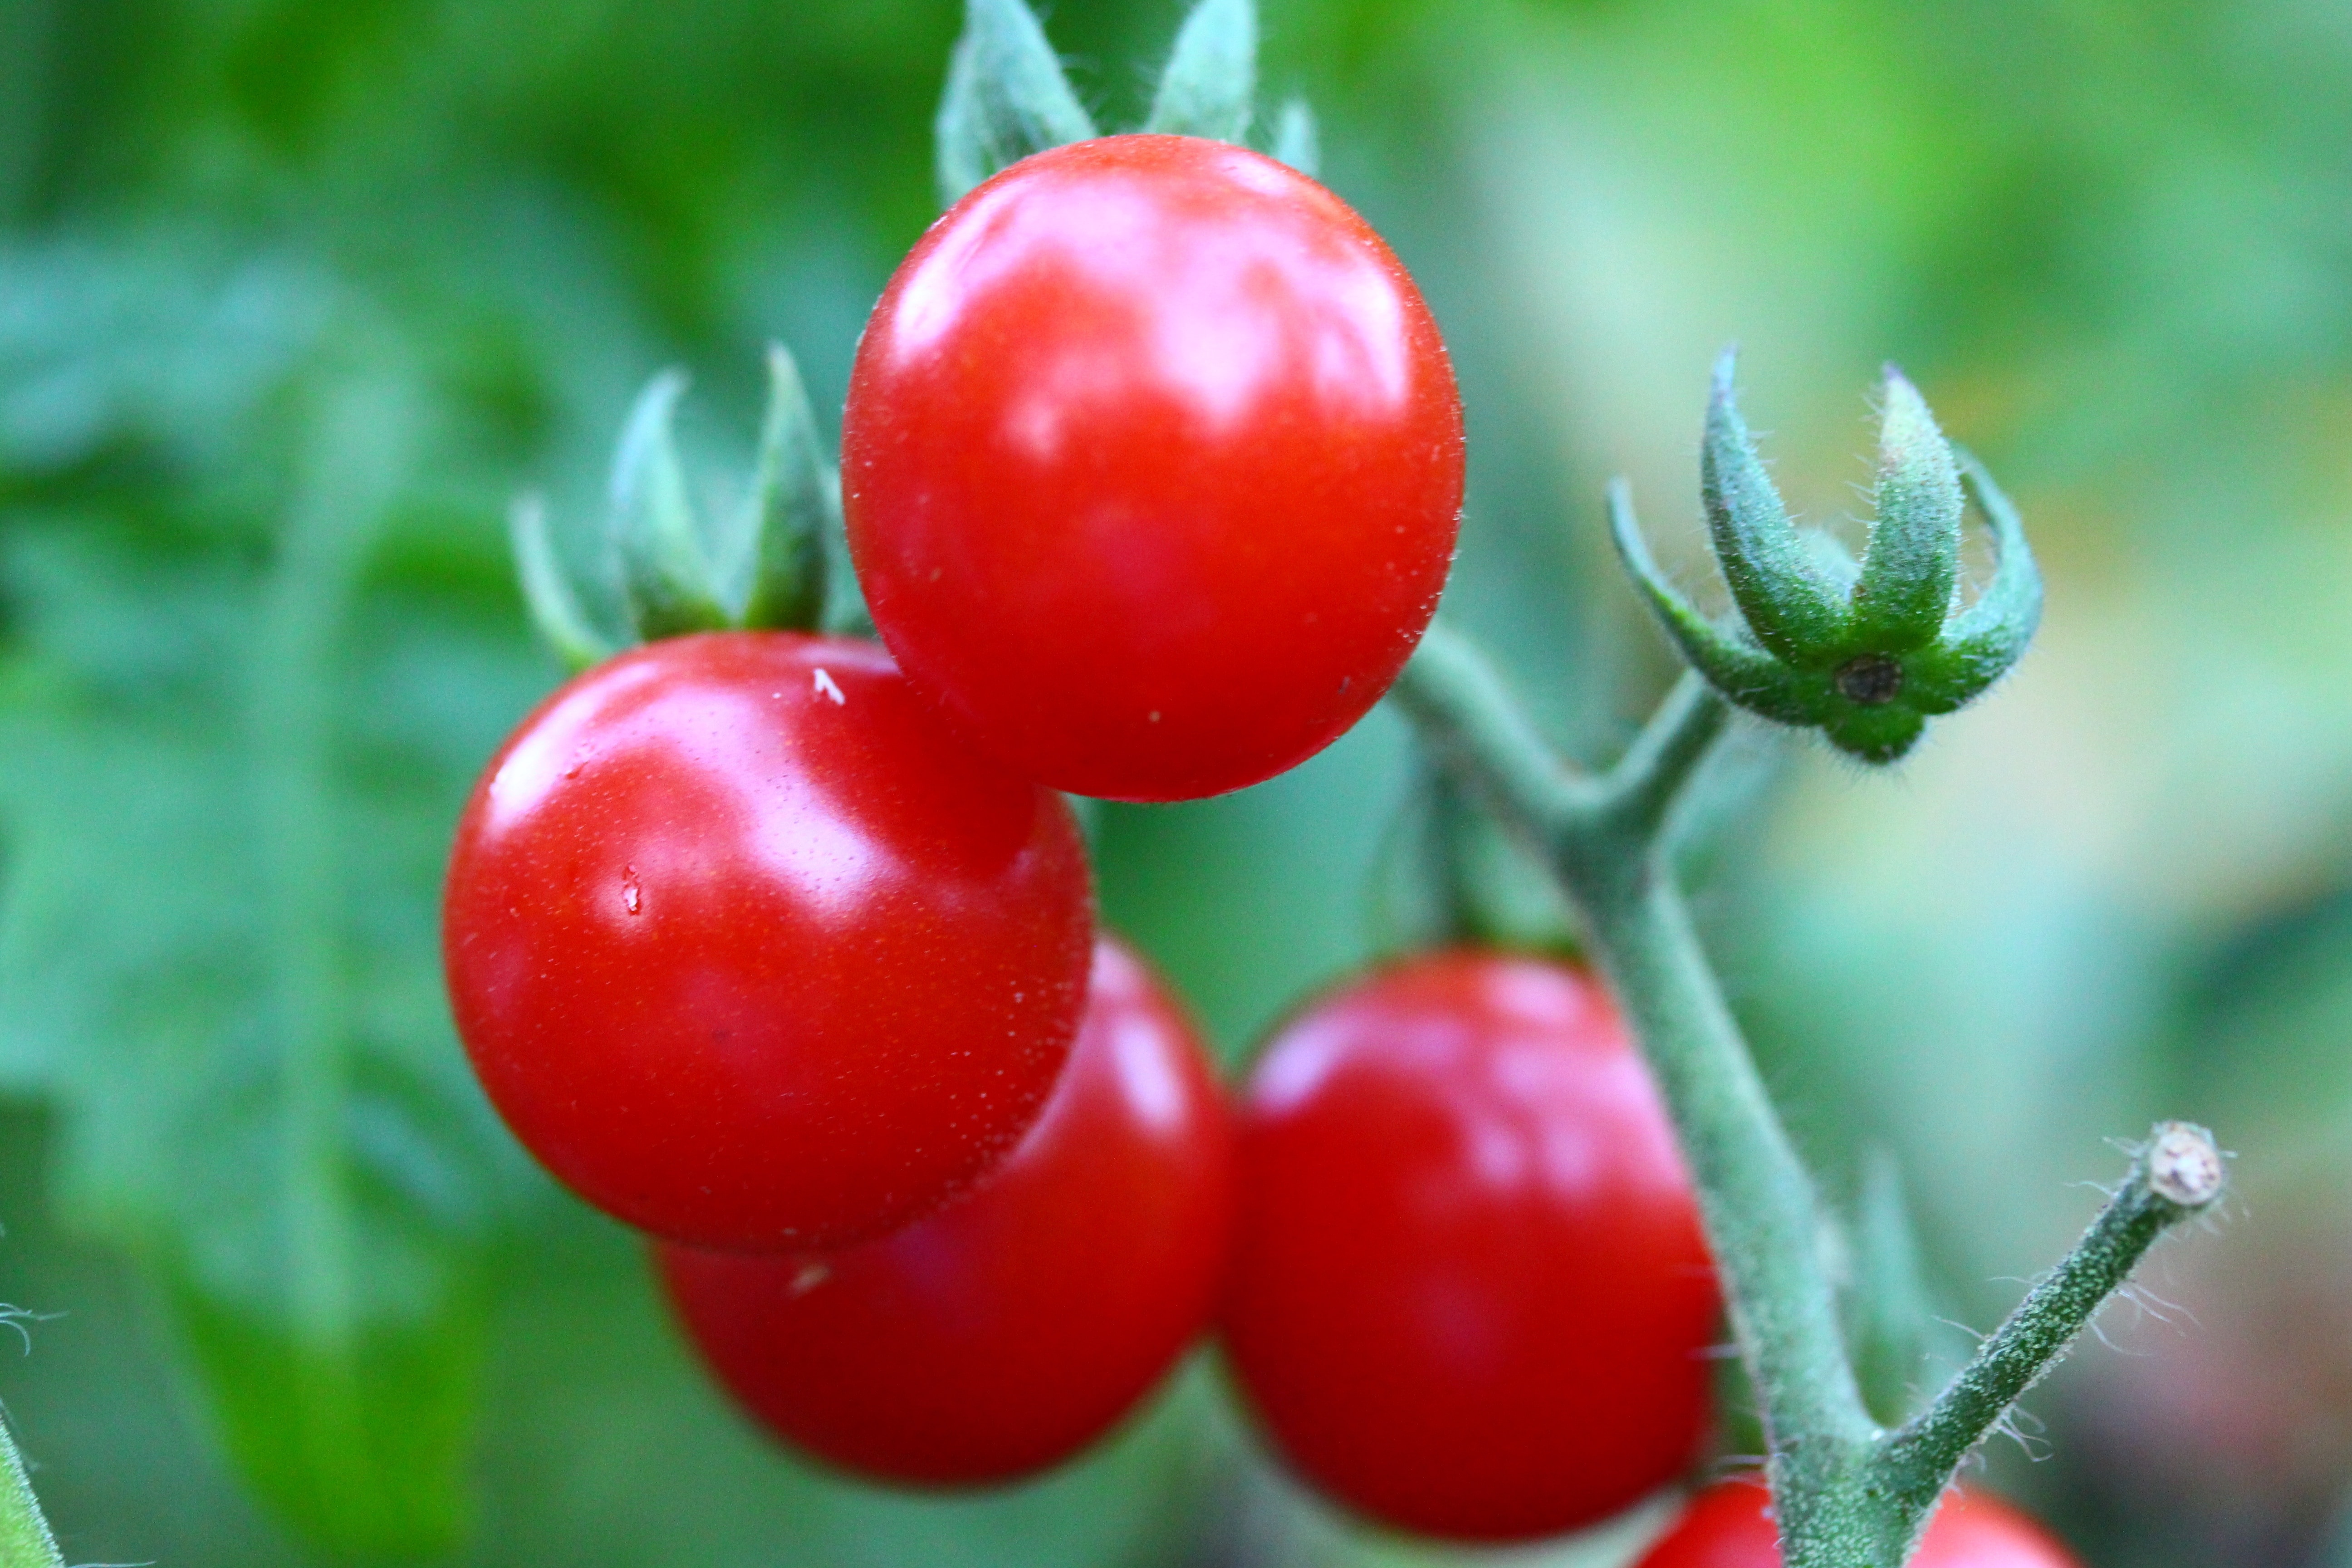 Cherry, Tomatoes, Gardening, Vegetable, red, growth